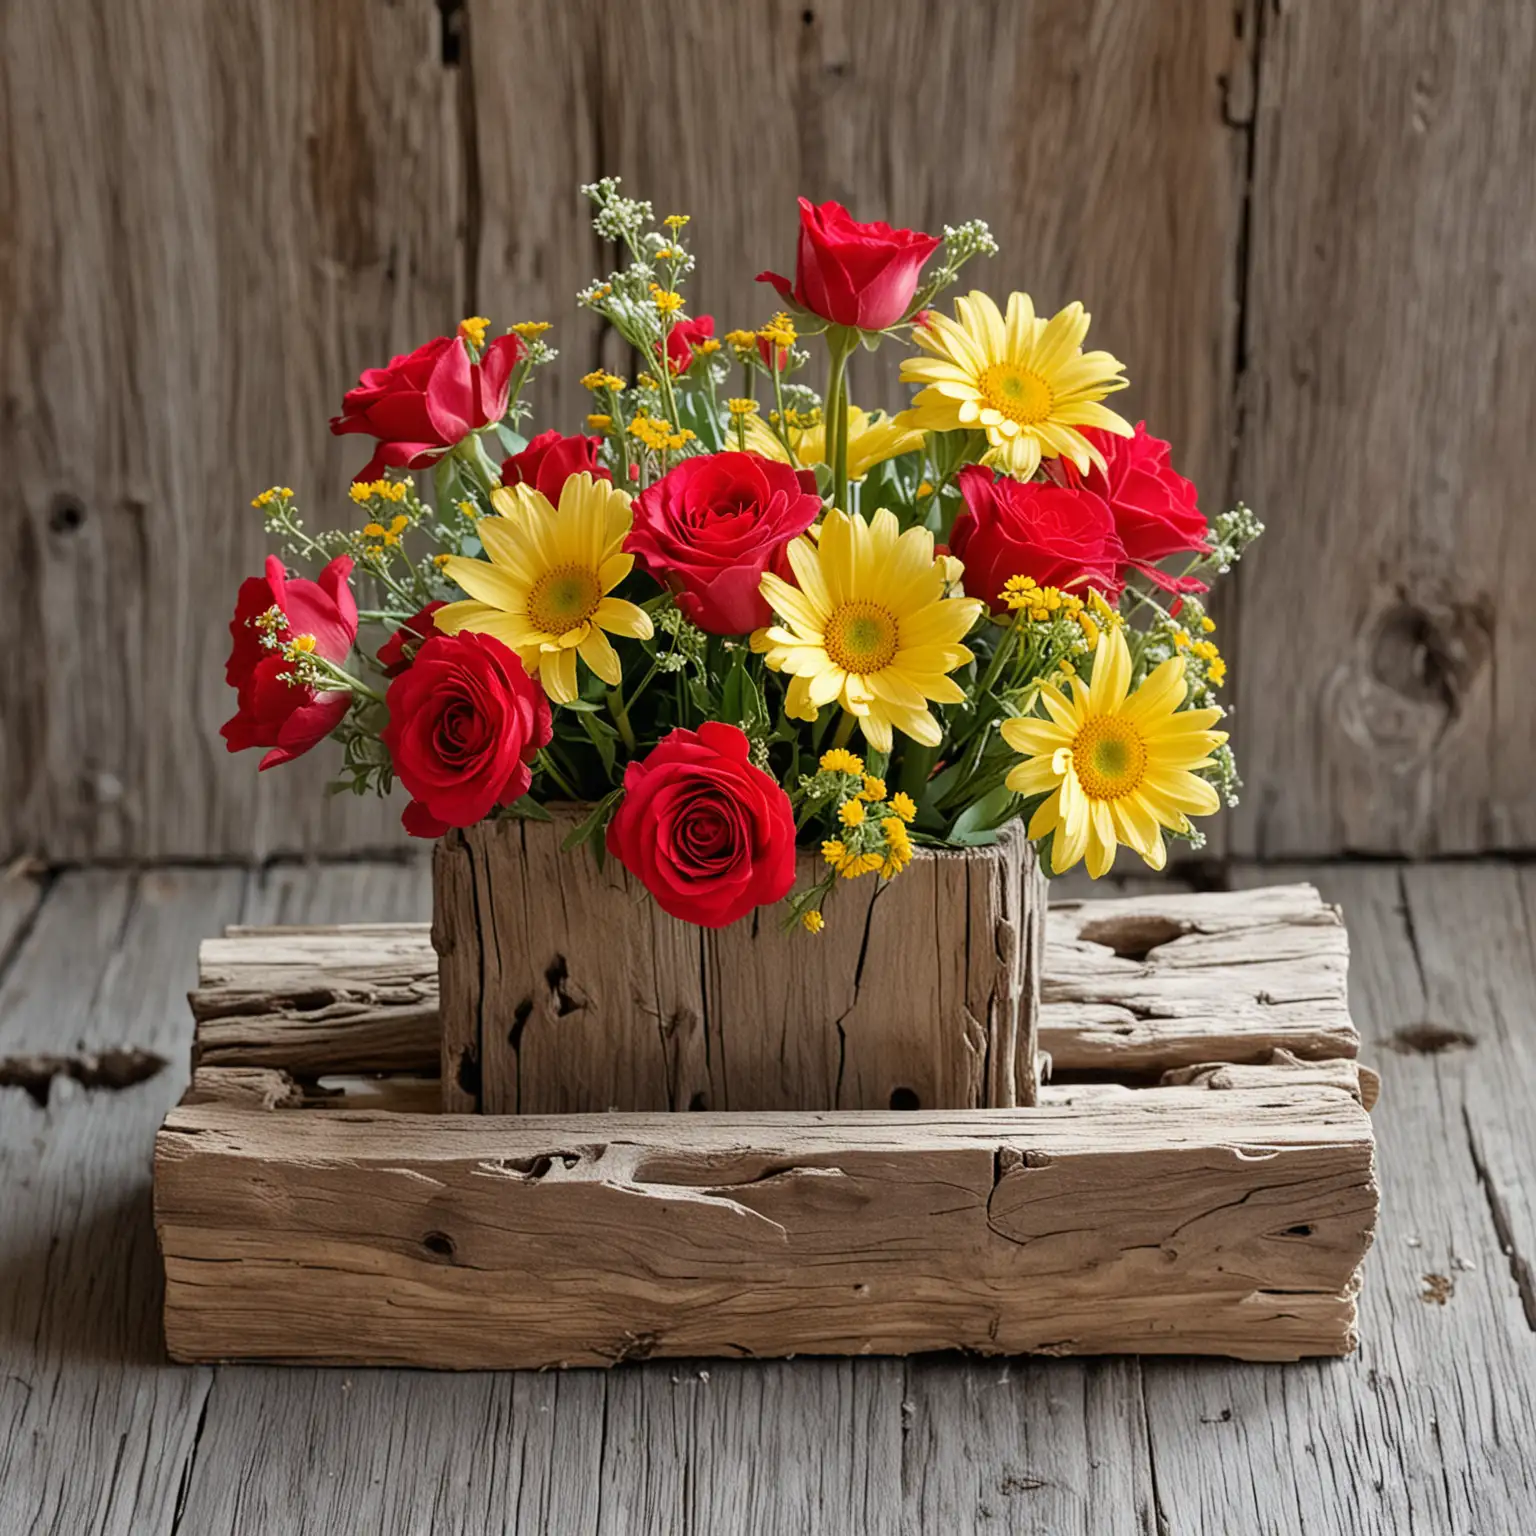 small spring boho wedding centerpiece using a small and simple bouquet of red roses and yellow daisies in a small worn out drift wood box as a vase